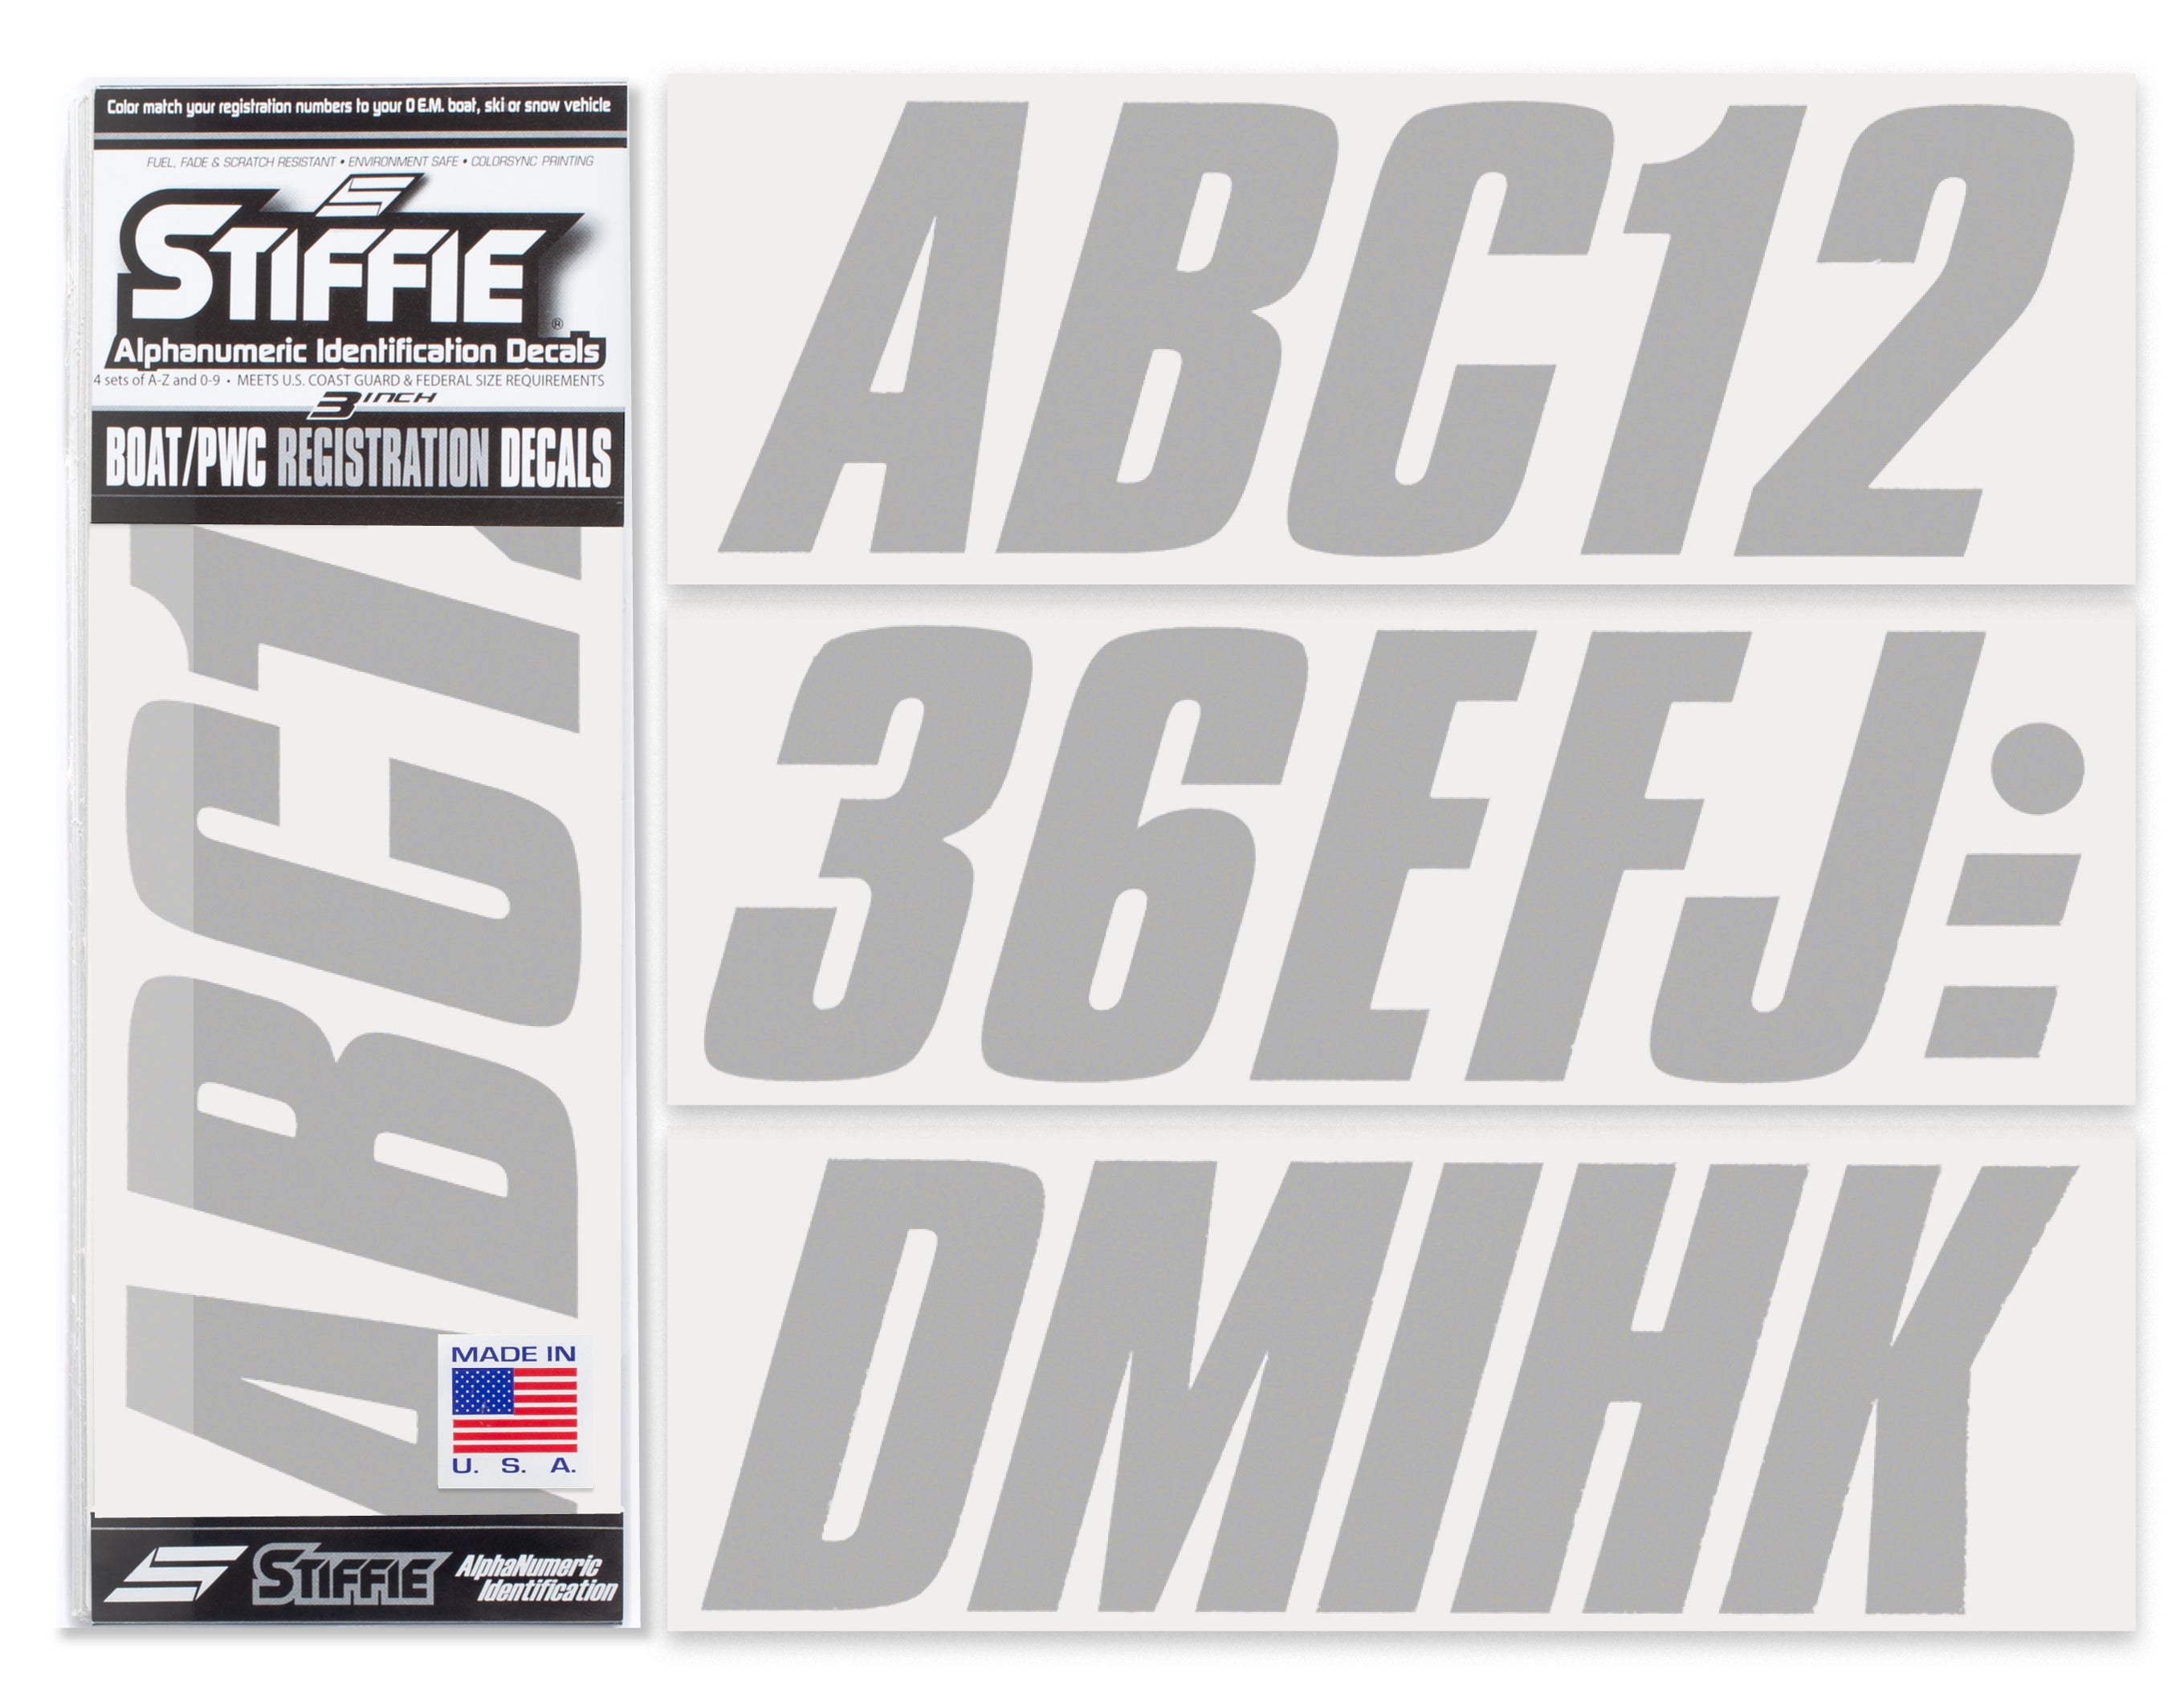 STIFFIE Shift Silver 3" ID Kit Alpha-Numeric Registration Identification Numbers Stickers Decals for Boats & Personal Watercraft